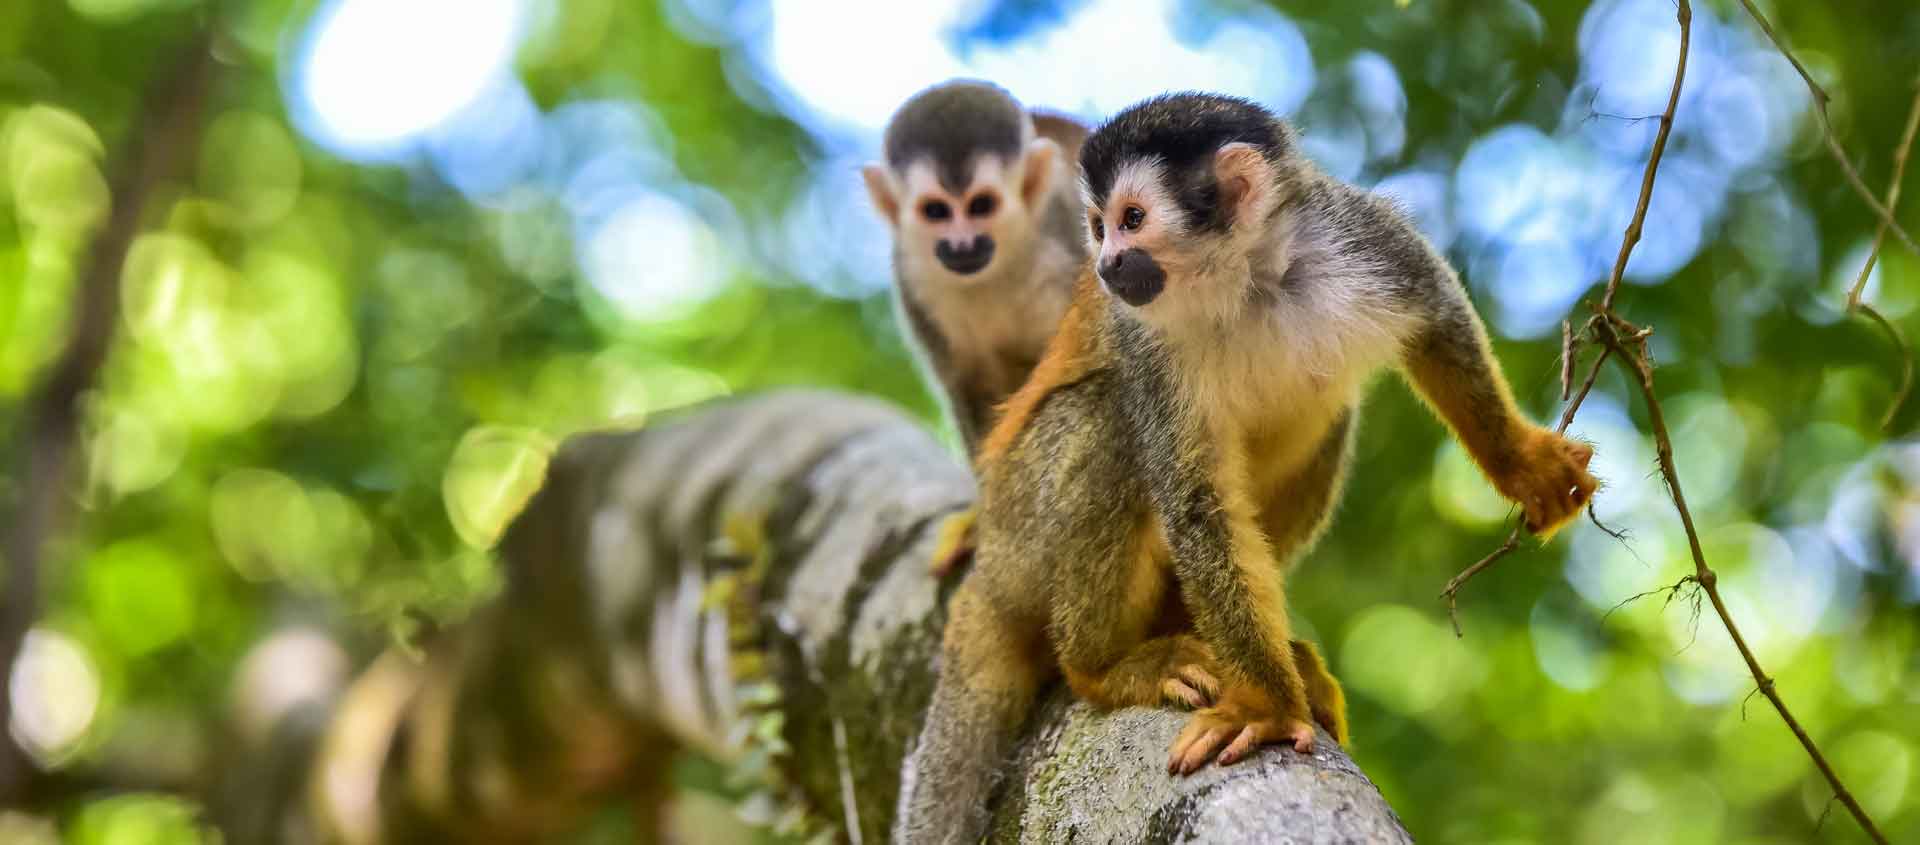 Costa Rica to Chile cruise image of Squirrel Monkeys